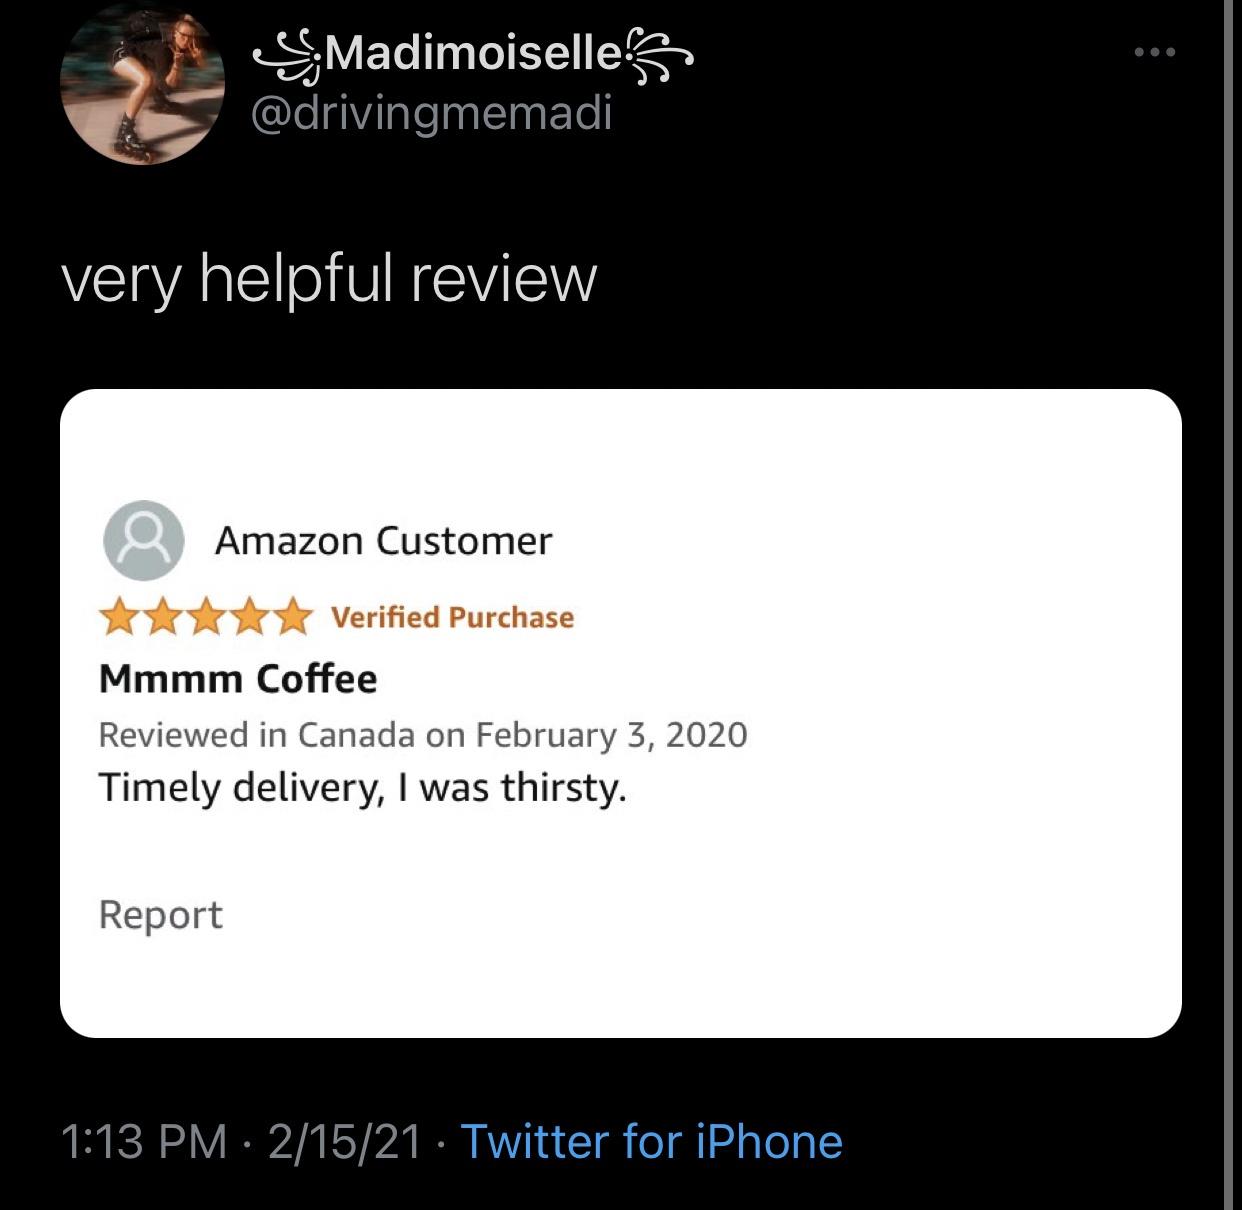 multimedia - I Madimoiselles very helpful review Amazon Customer Verified Purchase Mmmm Coffee Reviewed in Canada on Timely delivery, I was thirsty. Report 21521 Twitter for iPhone